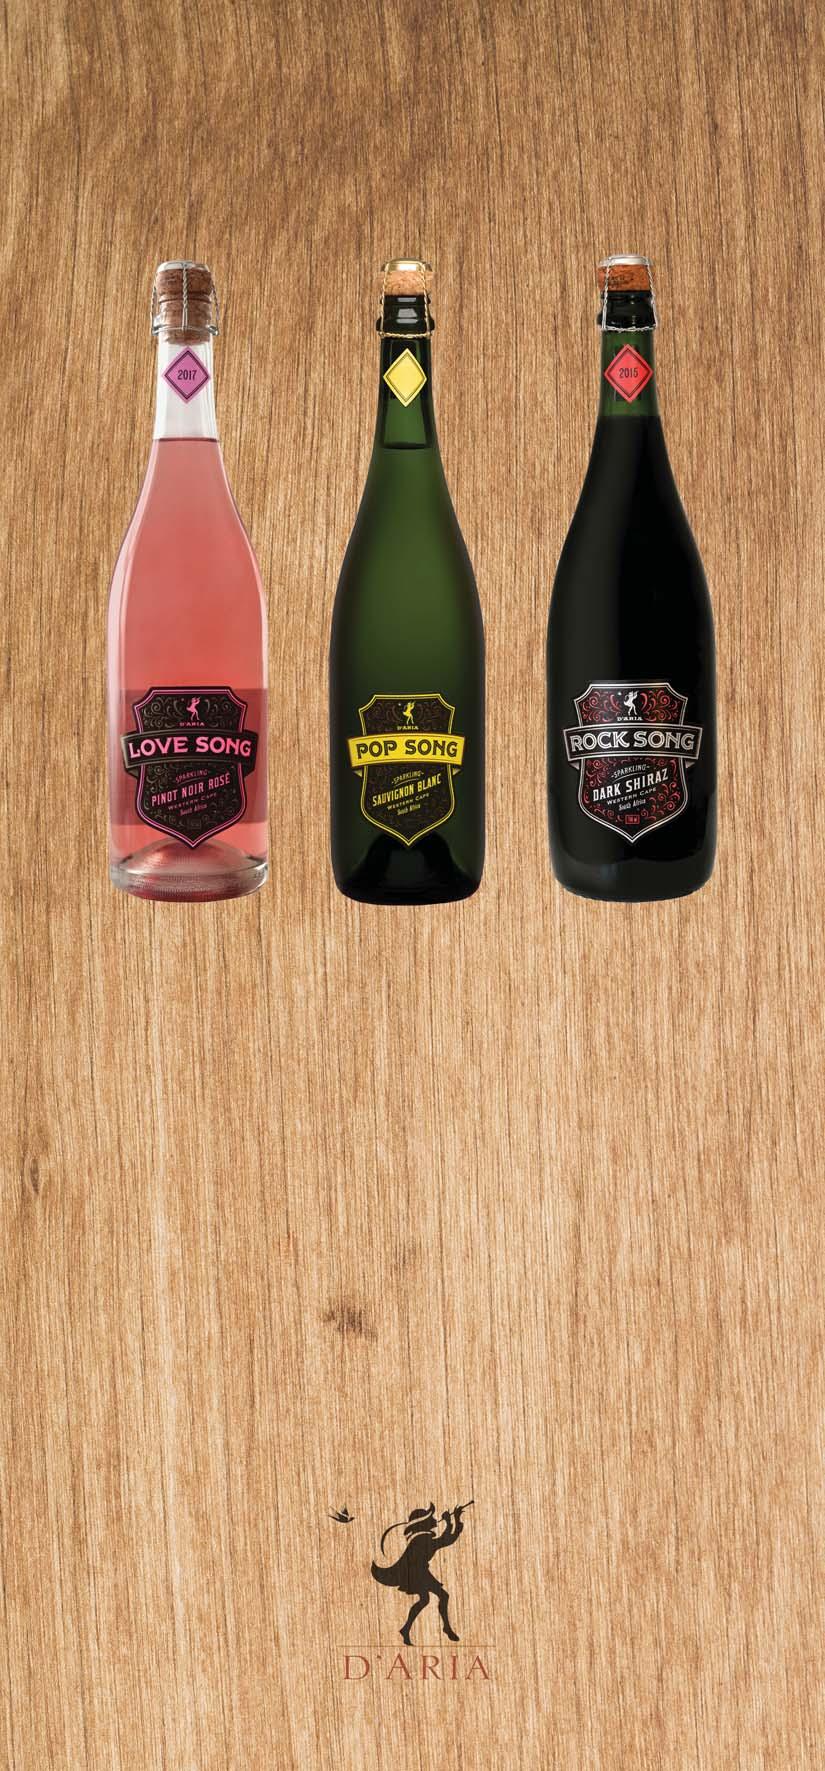 SPARKLING WINES by D ARIA D ARIA LOVE SONG PINOT NOIR SPARKLING 120 A Fresh and fragrant salmon coloured Pinot Noir Sparkling rose wine.